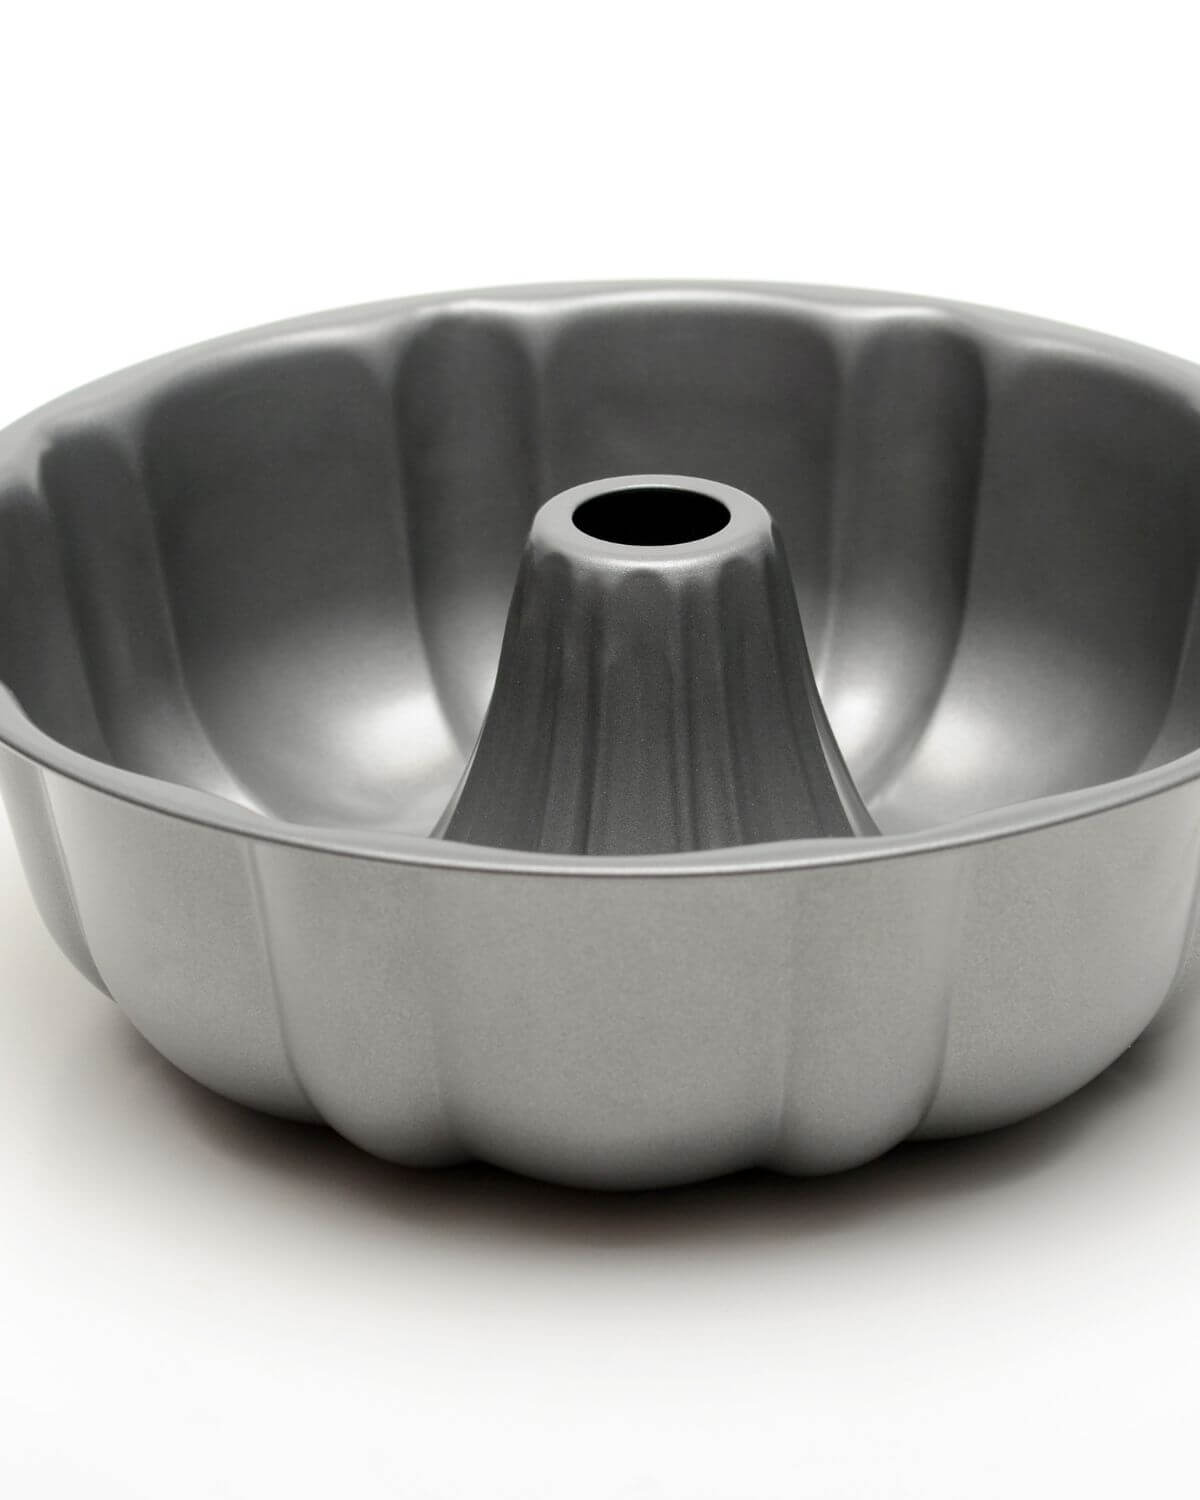 A bundt pan to put the batter in.